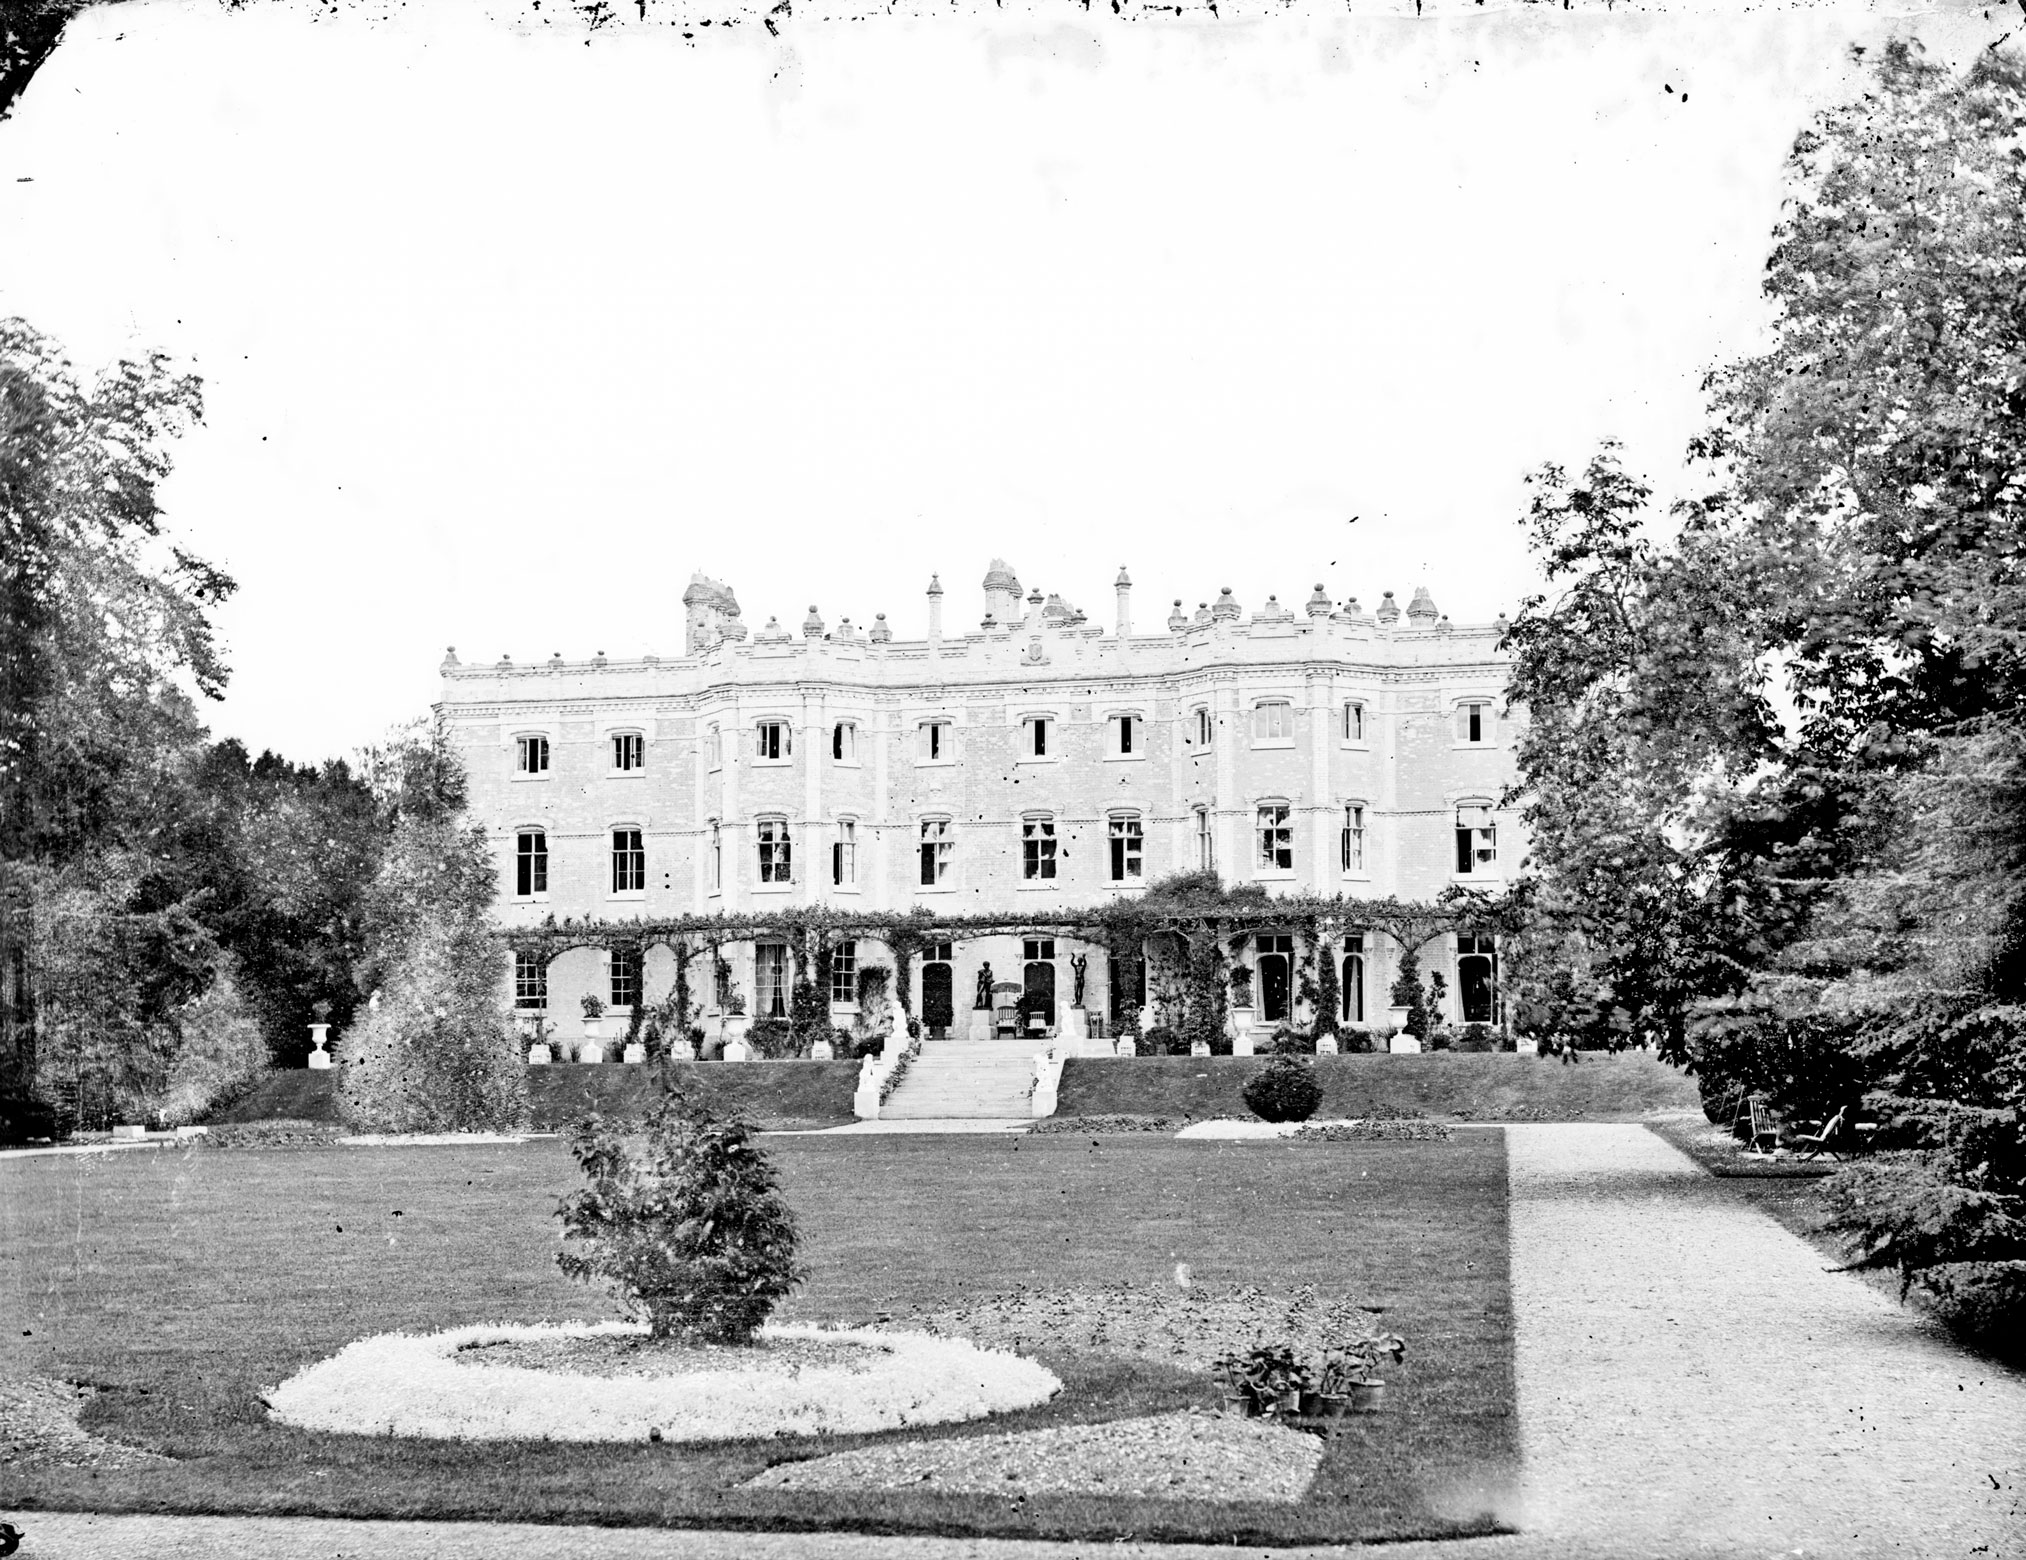 Victorian Archive image showing the garden, facade and terrace of a three-storey Country House.